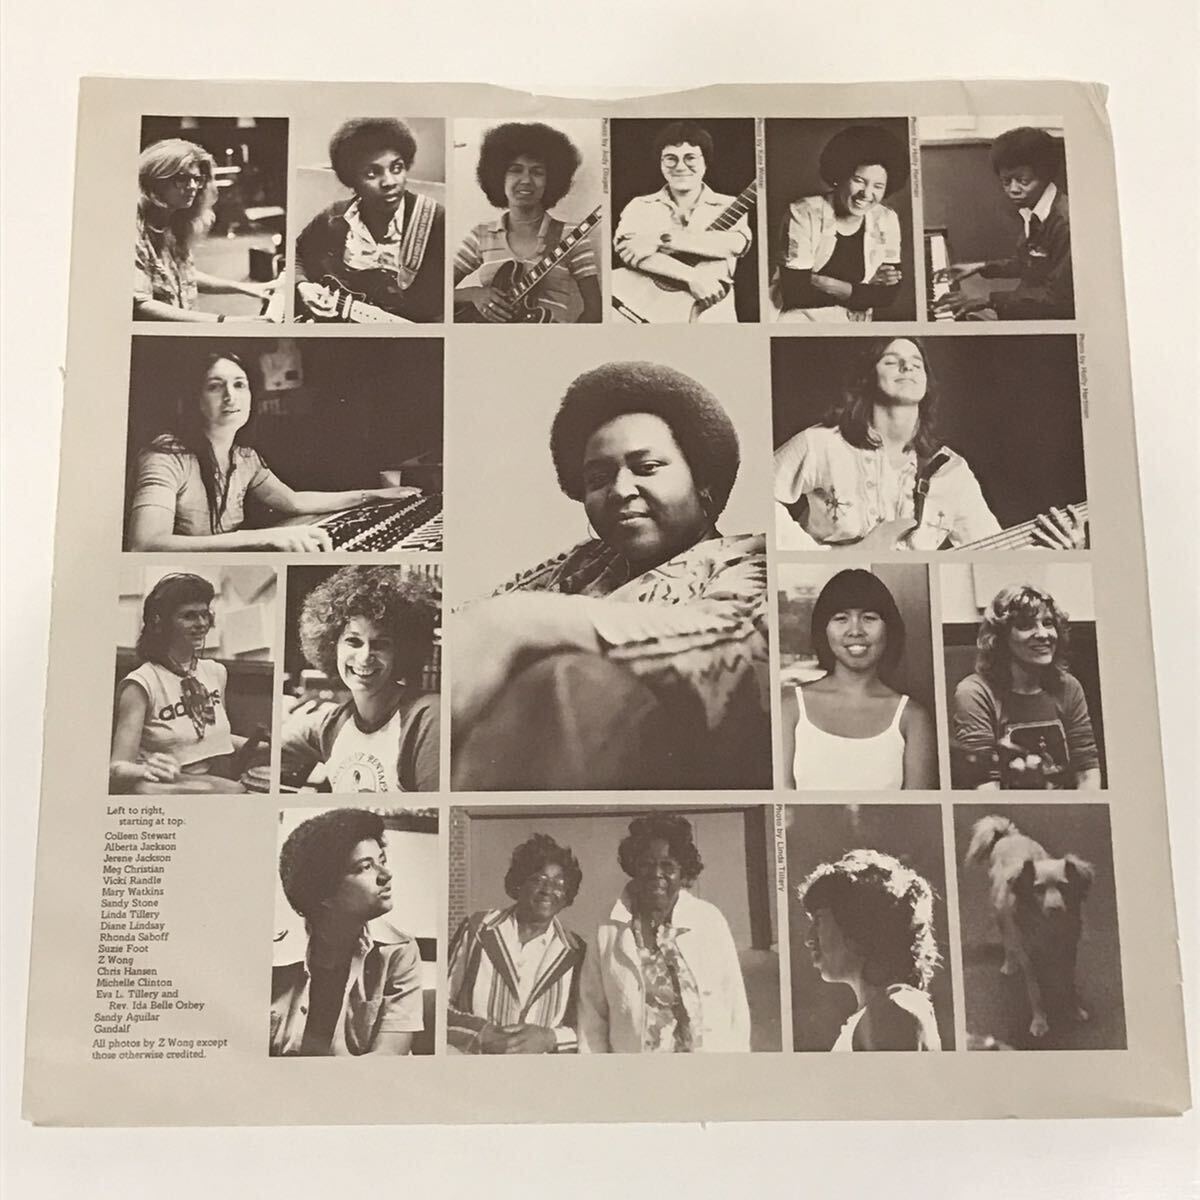  rare shrink attaching US original record LINDA TILLERY on OLIVIA RECORDS US ORIGINAL PRESS w/Shrink Wrap + Picture Sleeve attaching *FREEDOM TIME